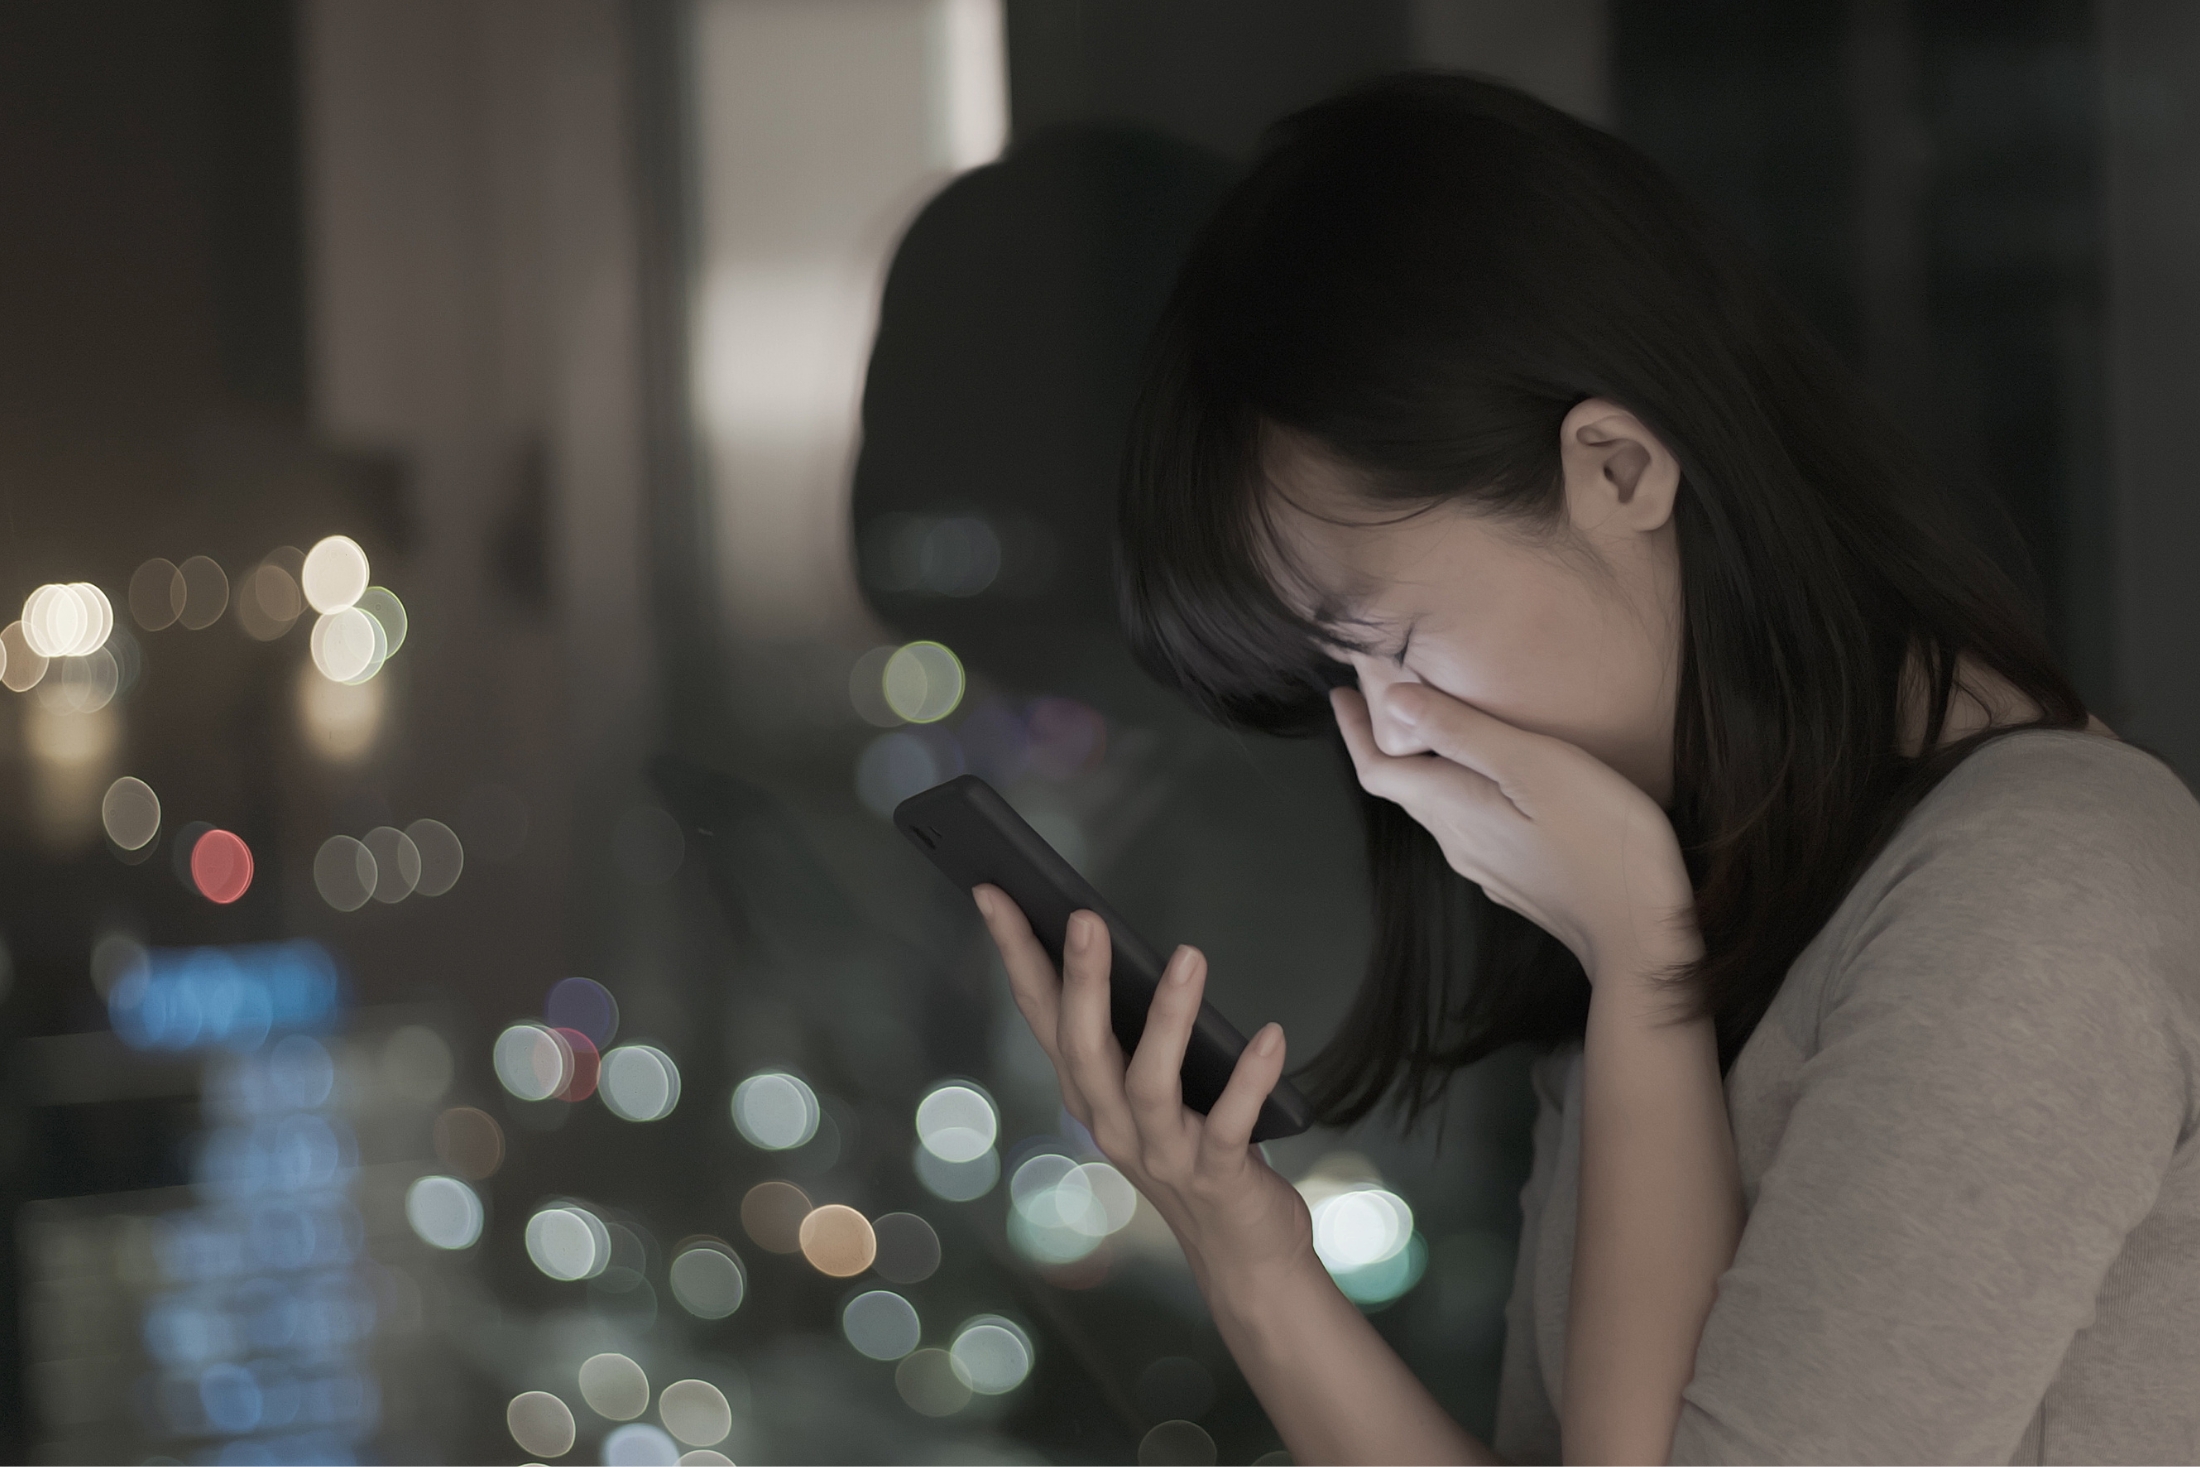 A distressed woman holds her left hand over her mouth while holding a cell phone in her right hand